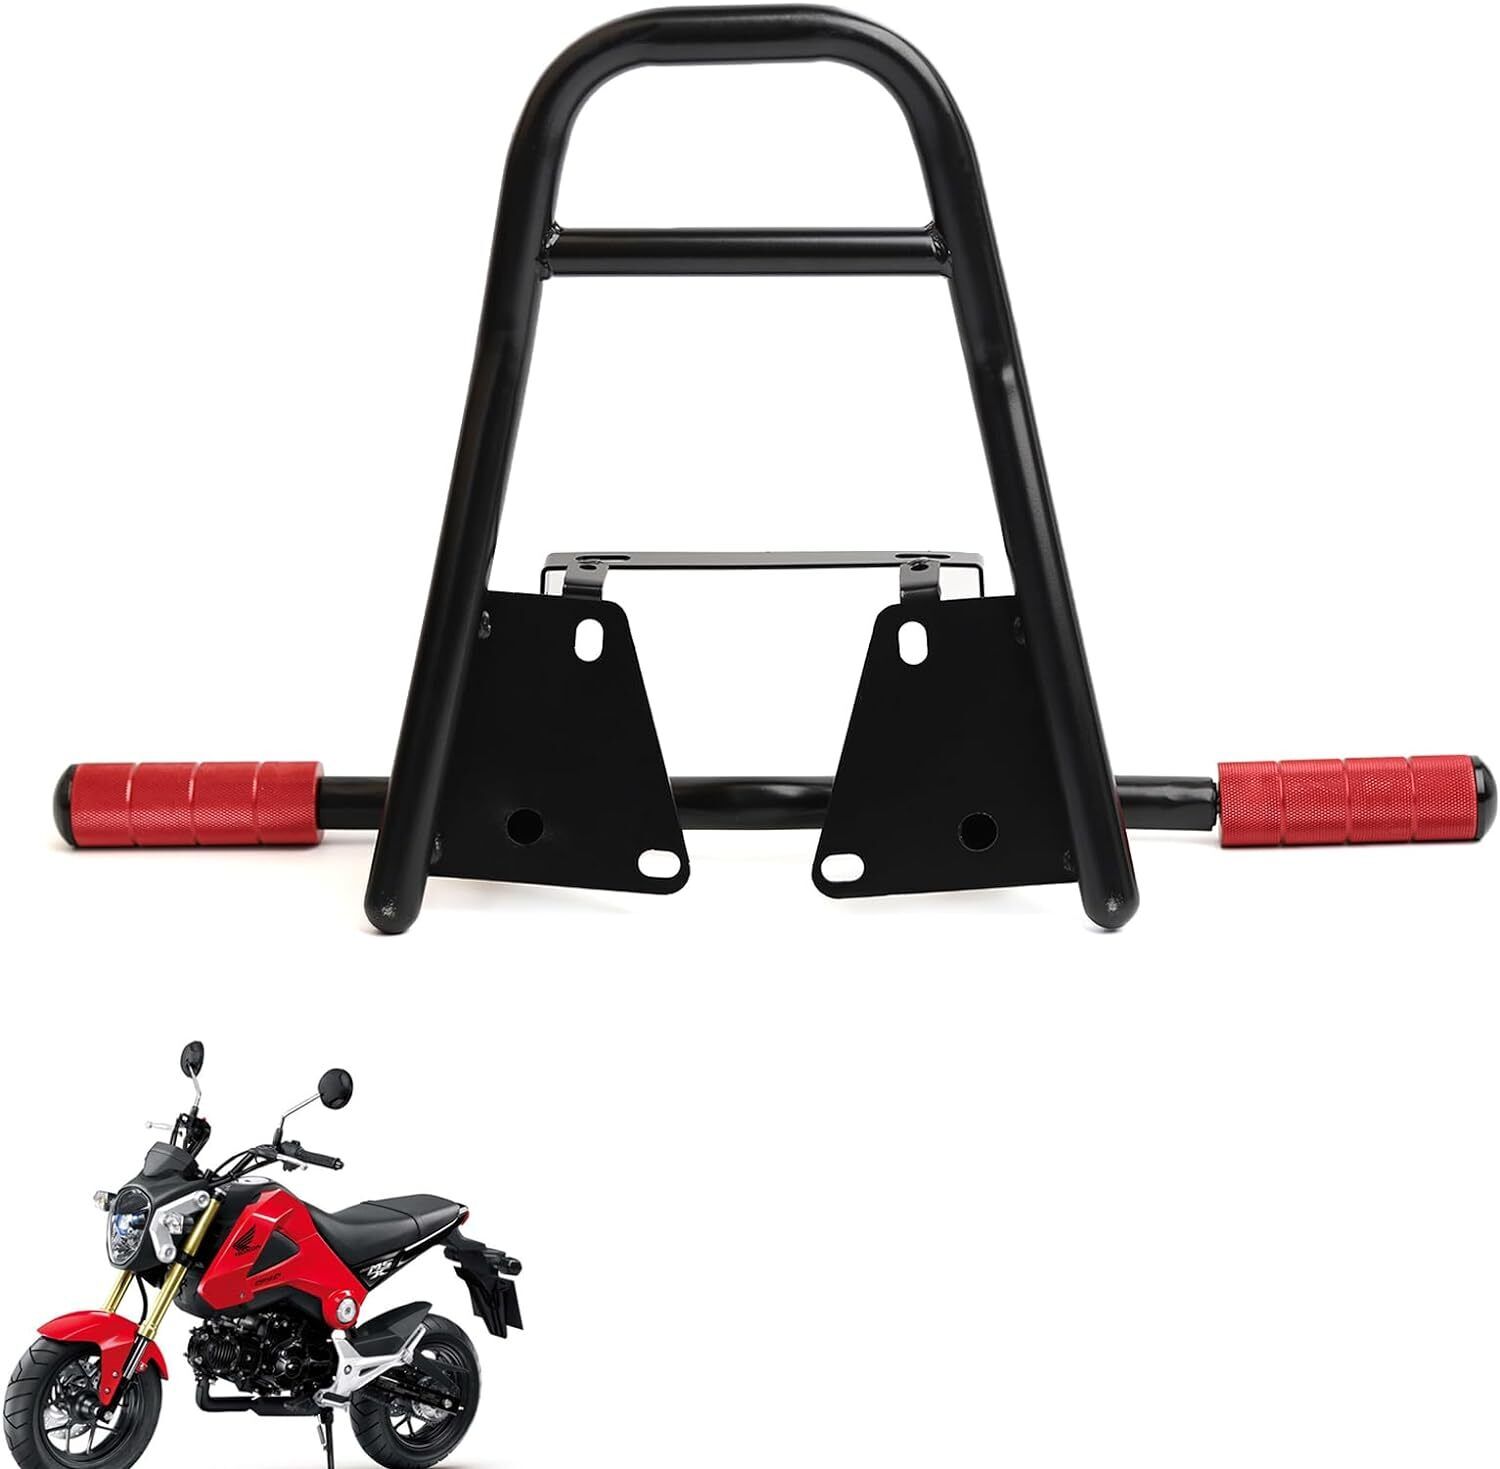 Motorcycle Stunt Rear Luggage with CNC Removable Perform Bar Fit for HondaGrom